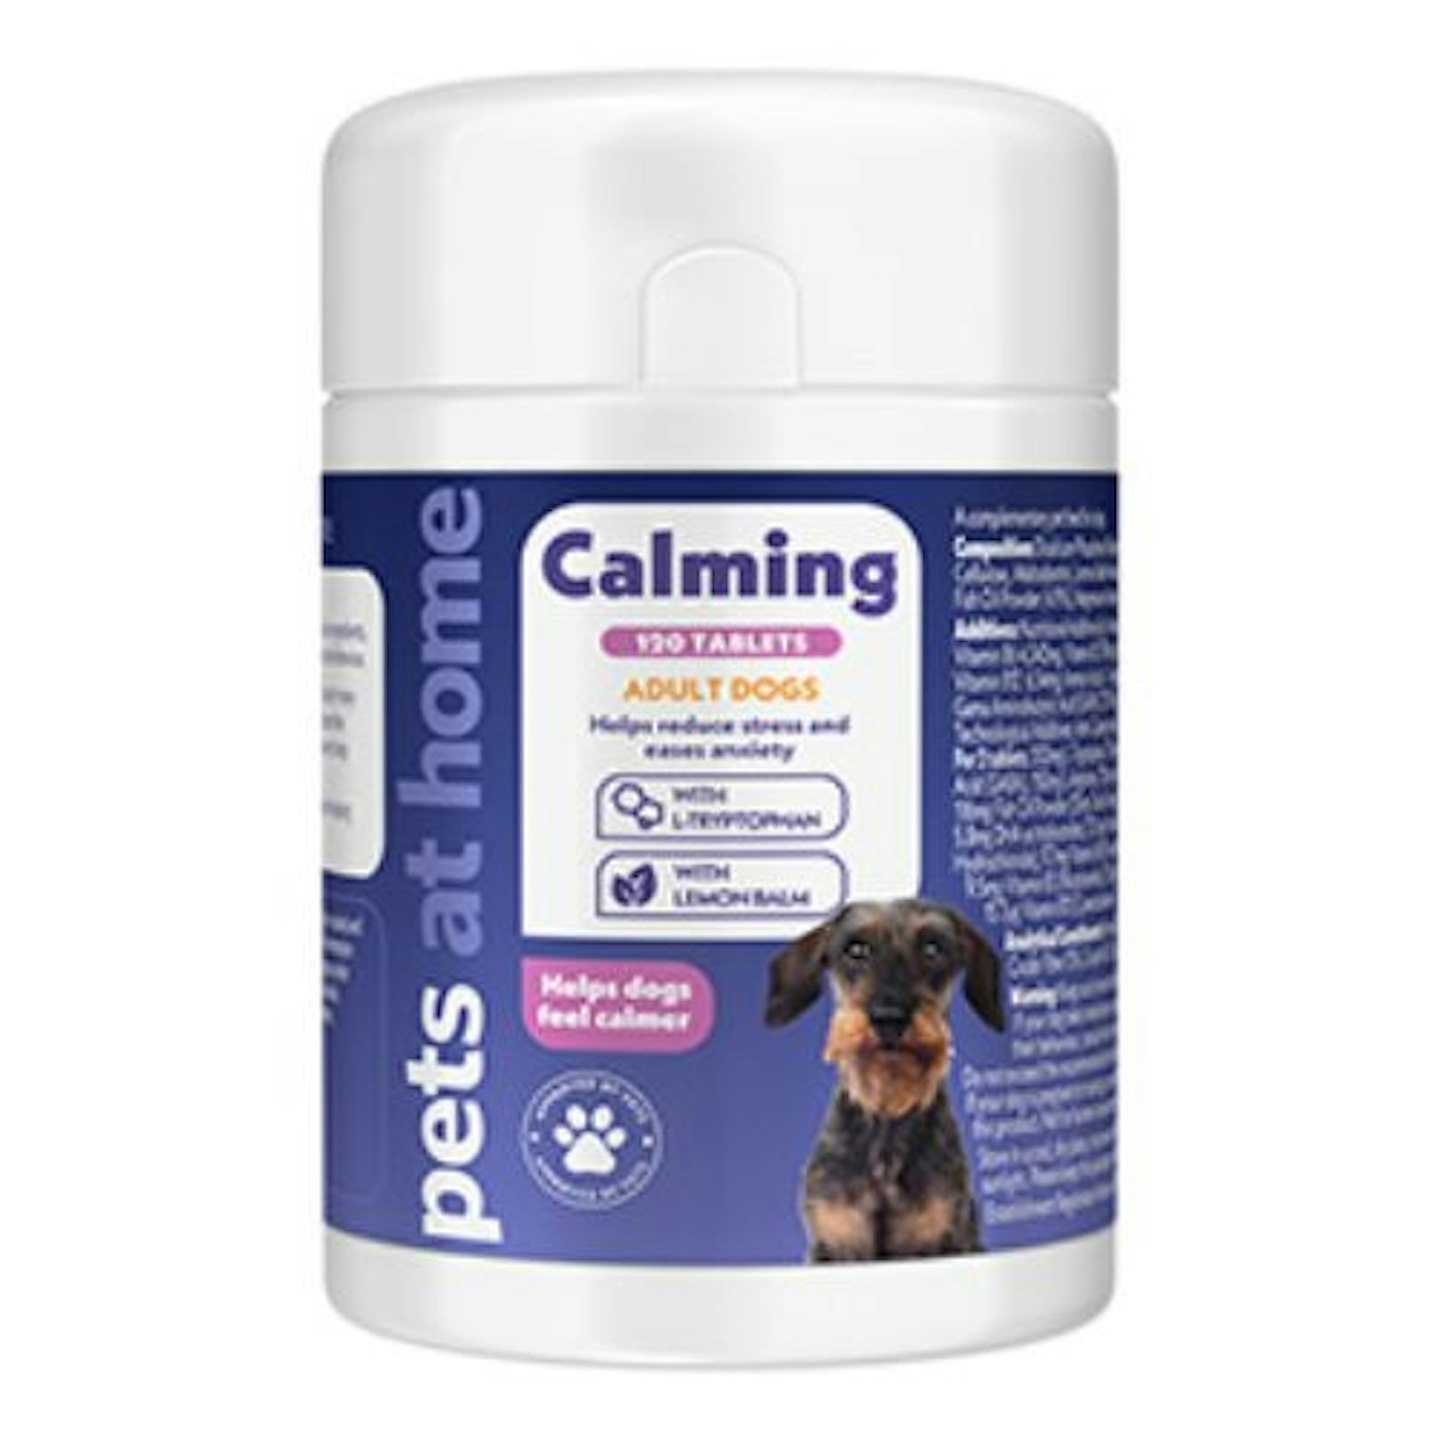 Pets at Home Calming Tablets for Adult Dogs 120 Pack